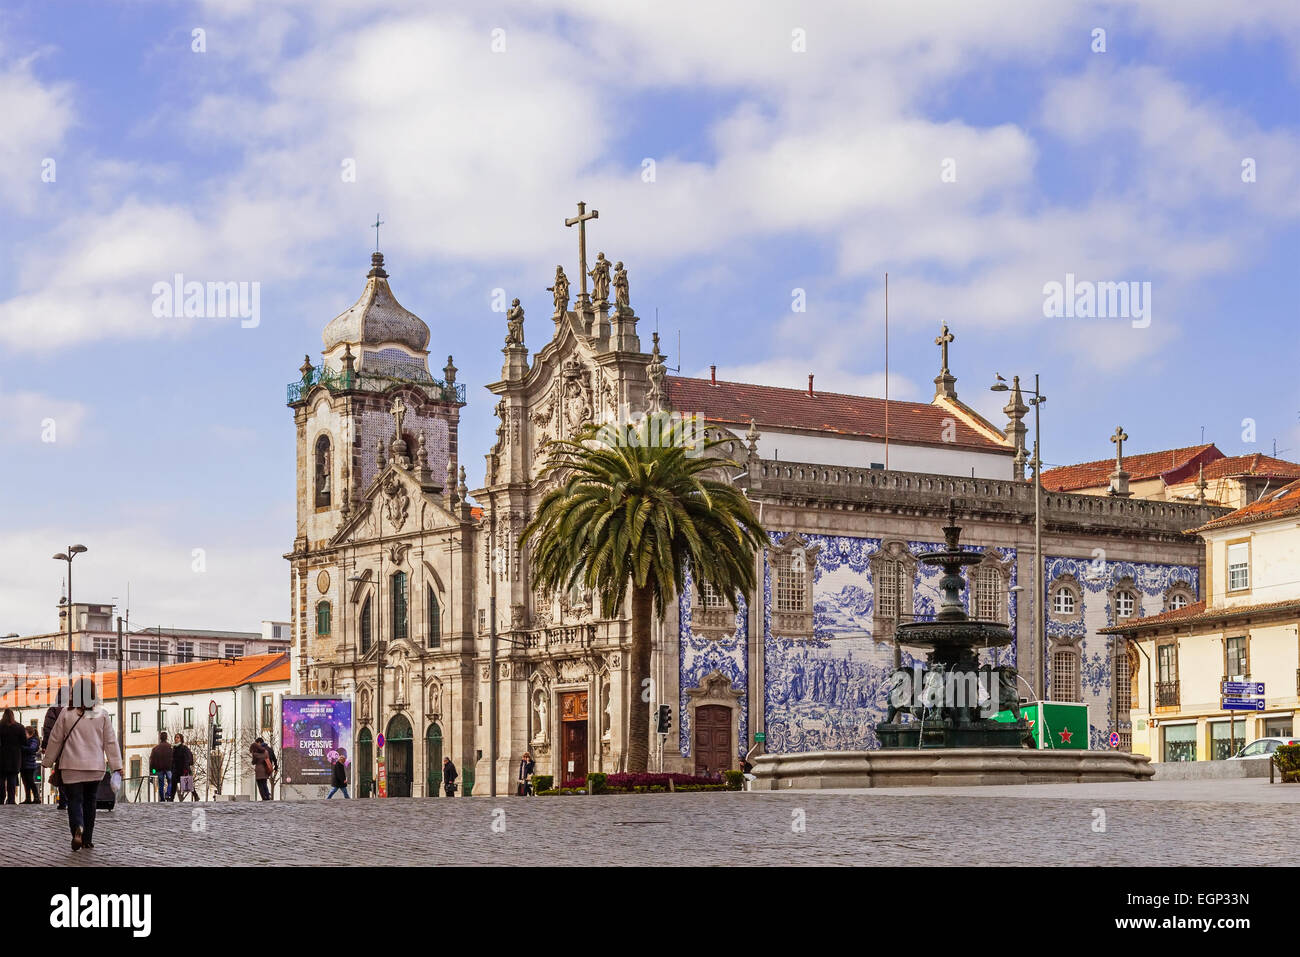 Porto, Portugal. Carmelitas Church on the left, Mannerist and Baroque styles, and Carmo Church at the right in Rococo style. Stock Photo